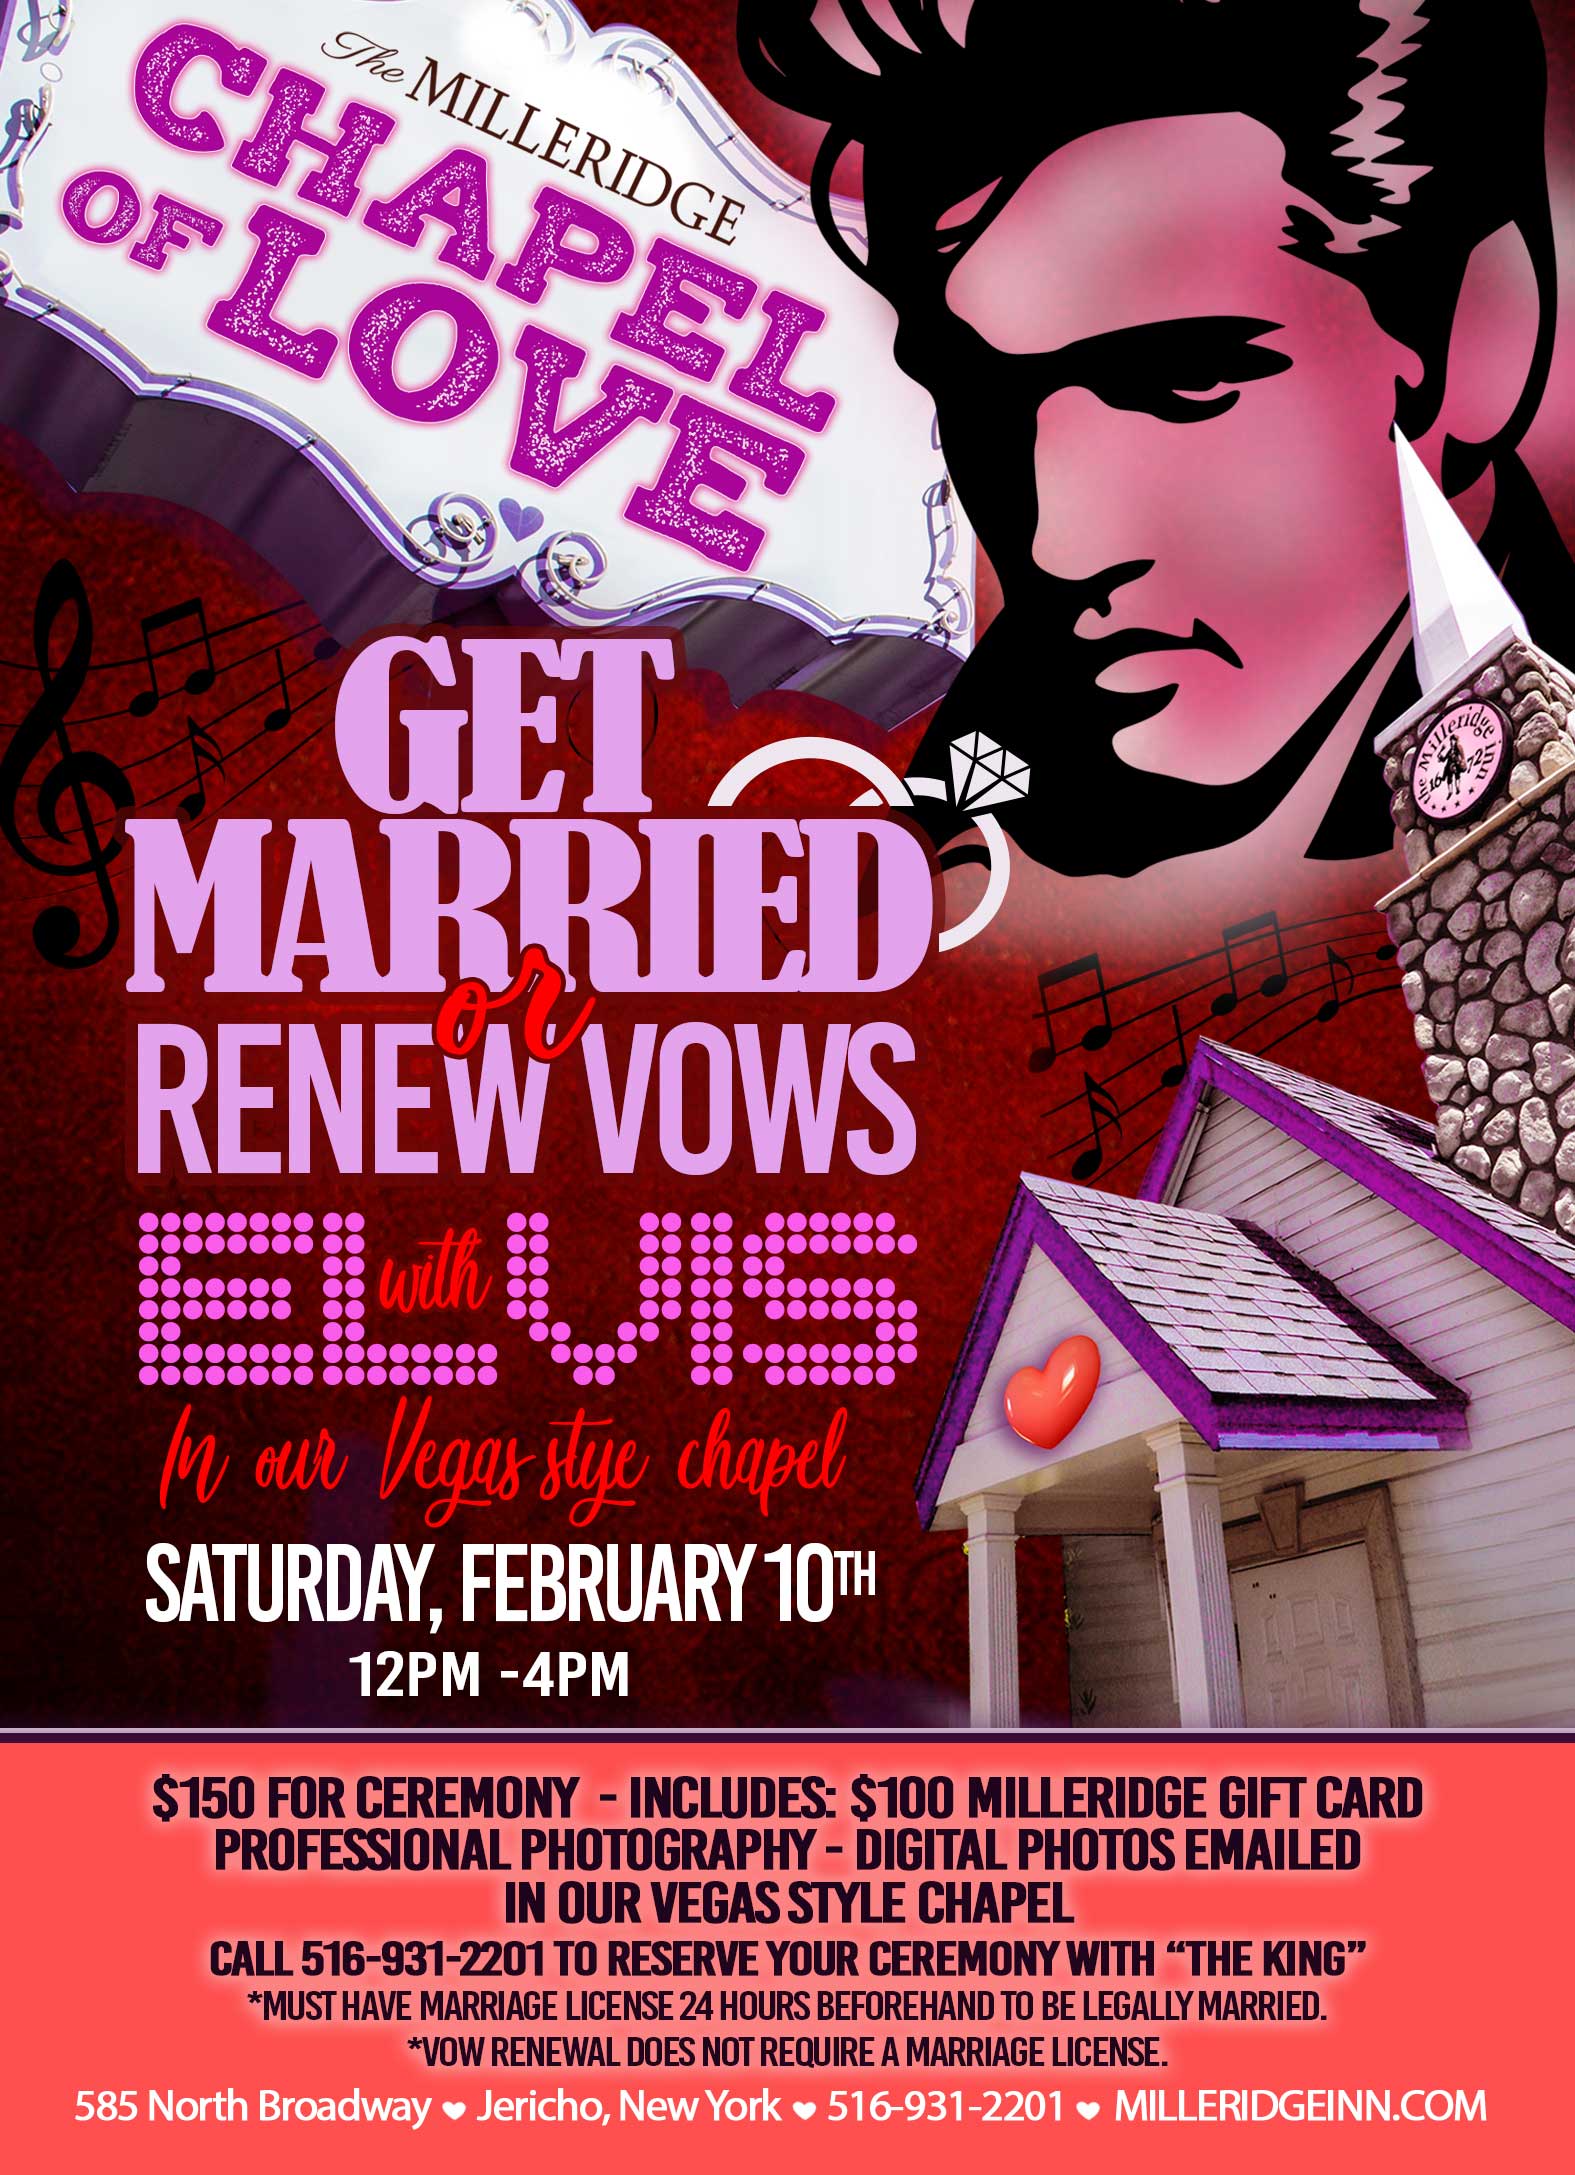 Get Married, Renew Vows with Elvis